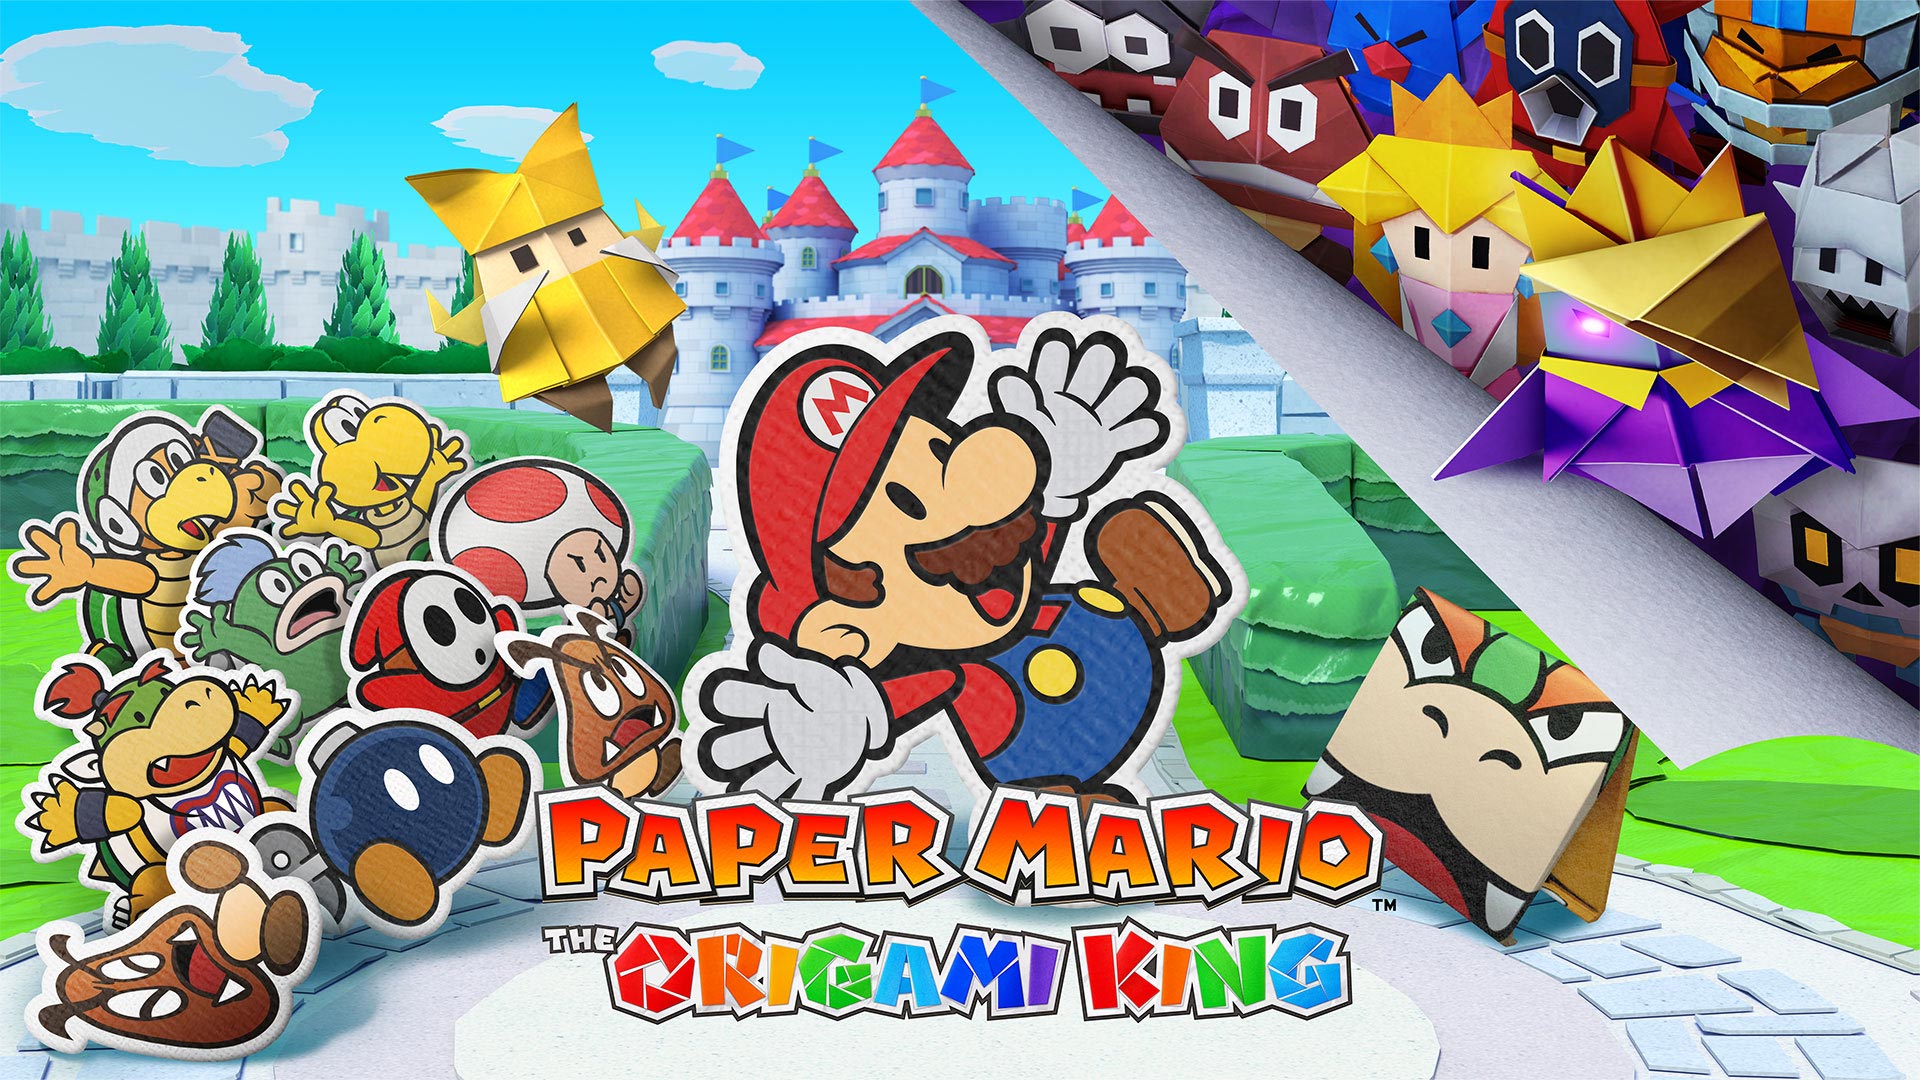 Paper Mario The Origami King For Nintendo Switch Nintendo Game Details - roblox asset downloader cloud